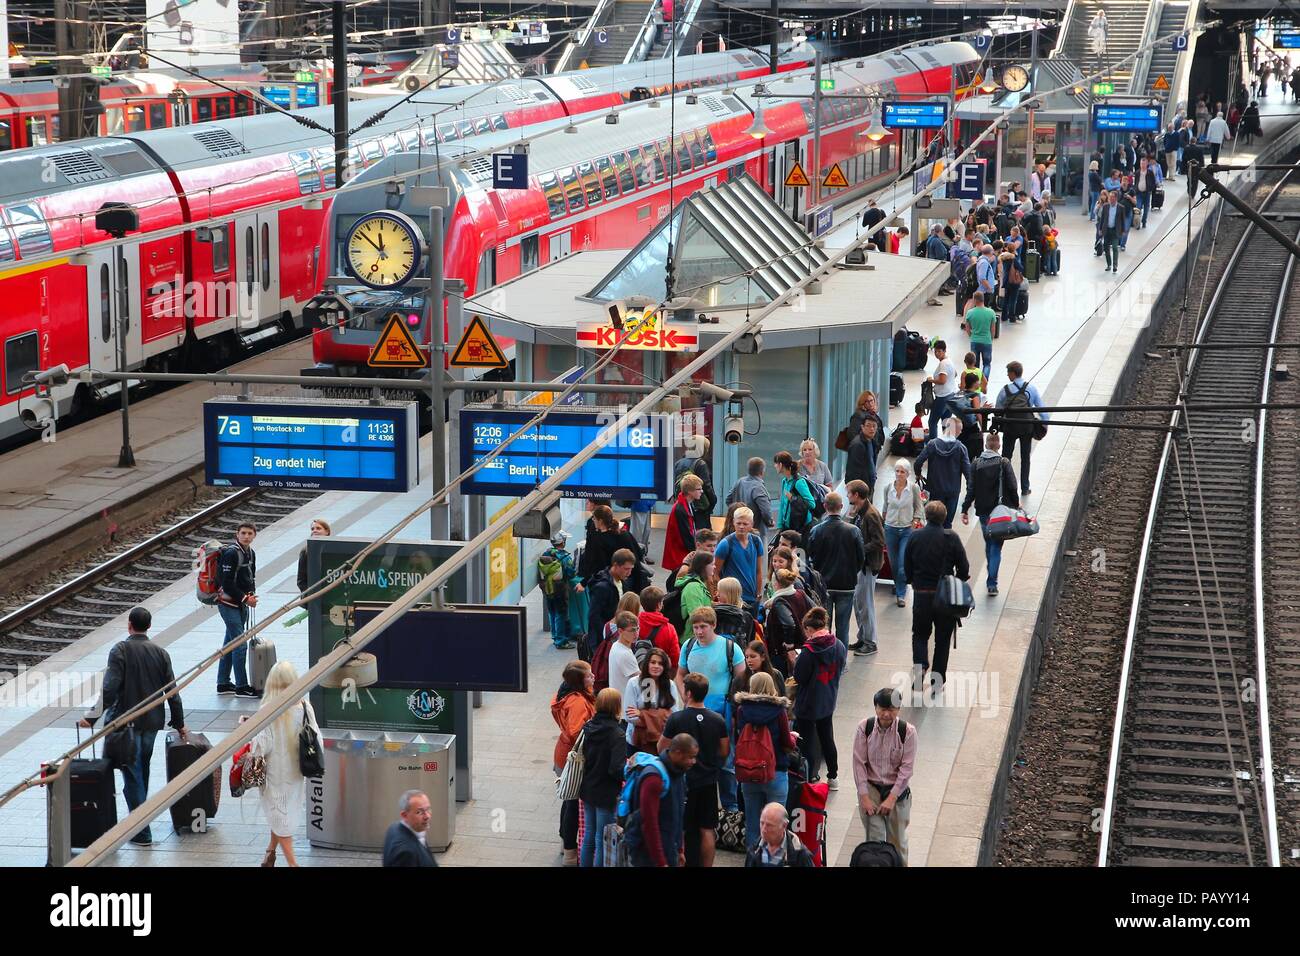 HAMBURG, GERMANY - AUGUST 28, 2014: Travelers board trains at Central Railway Station (Hauptbahnhof) in Hamburg. With 450,000 daily passengers it is t Stock Photo